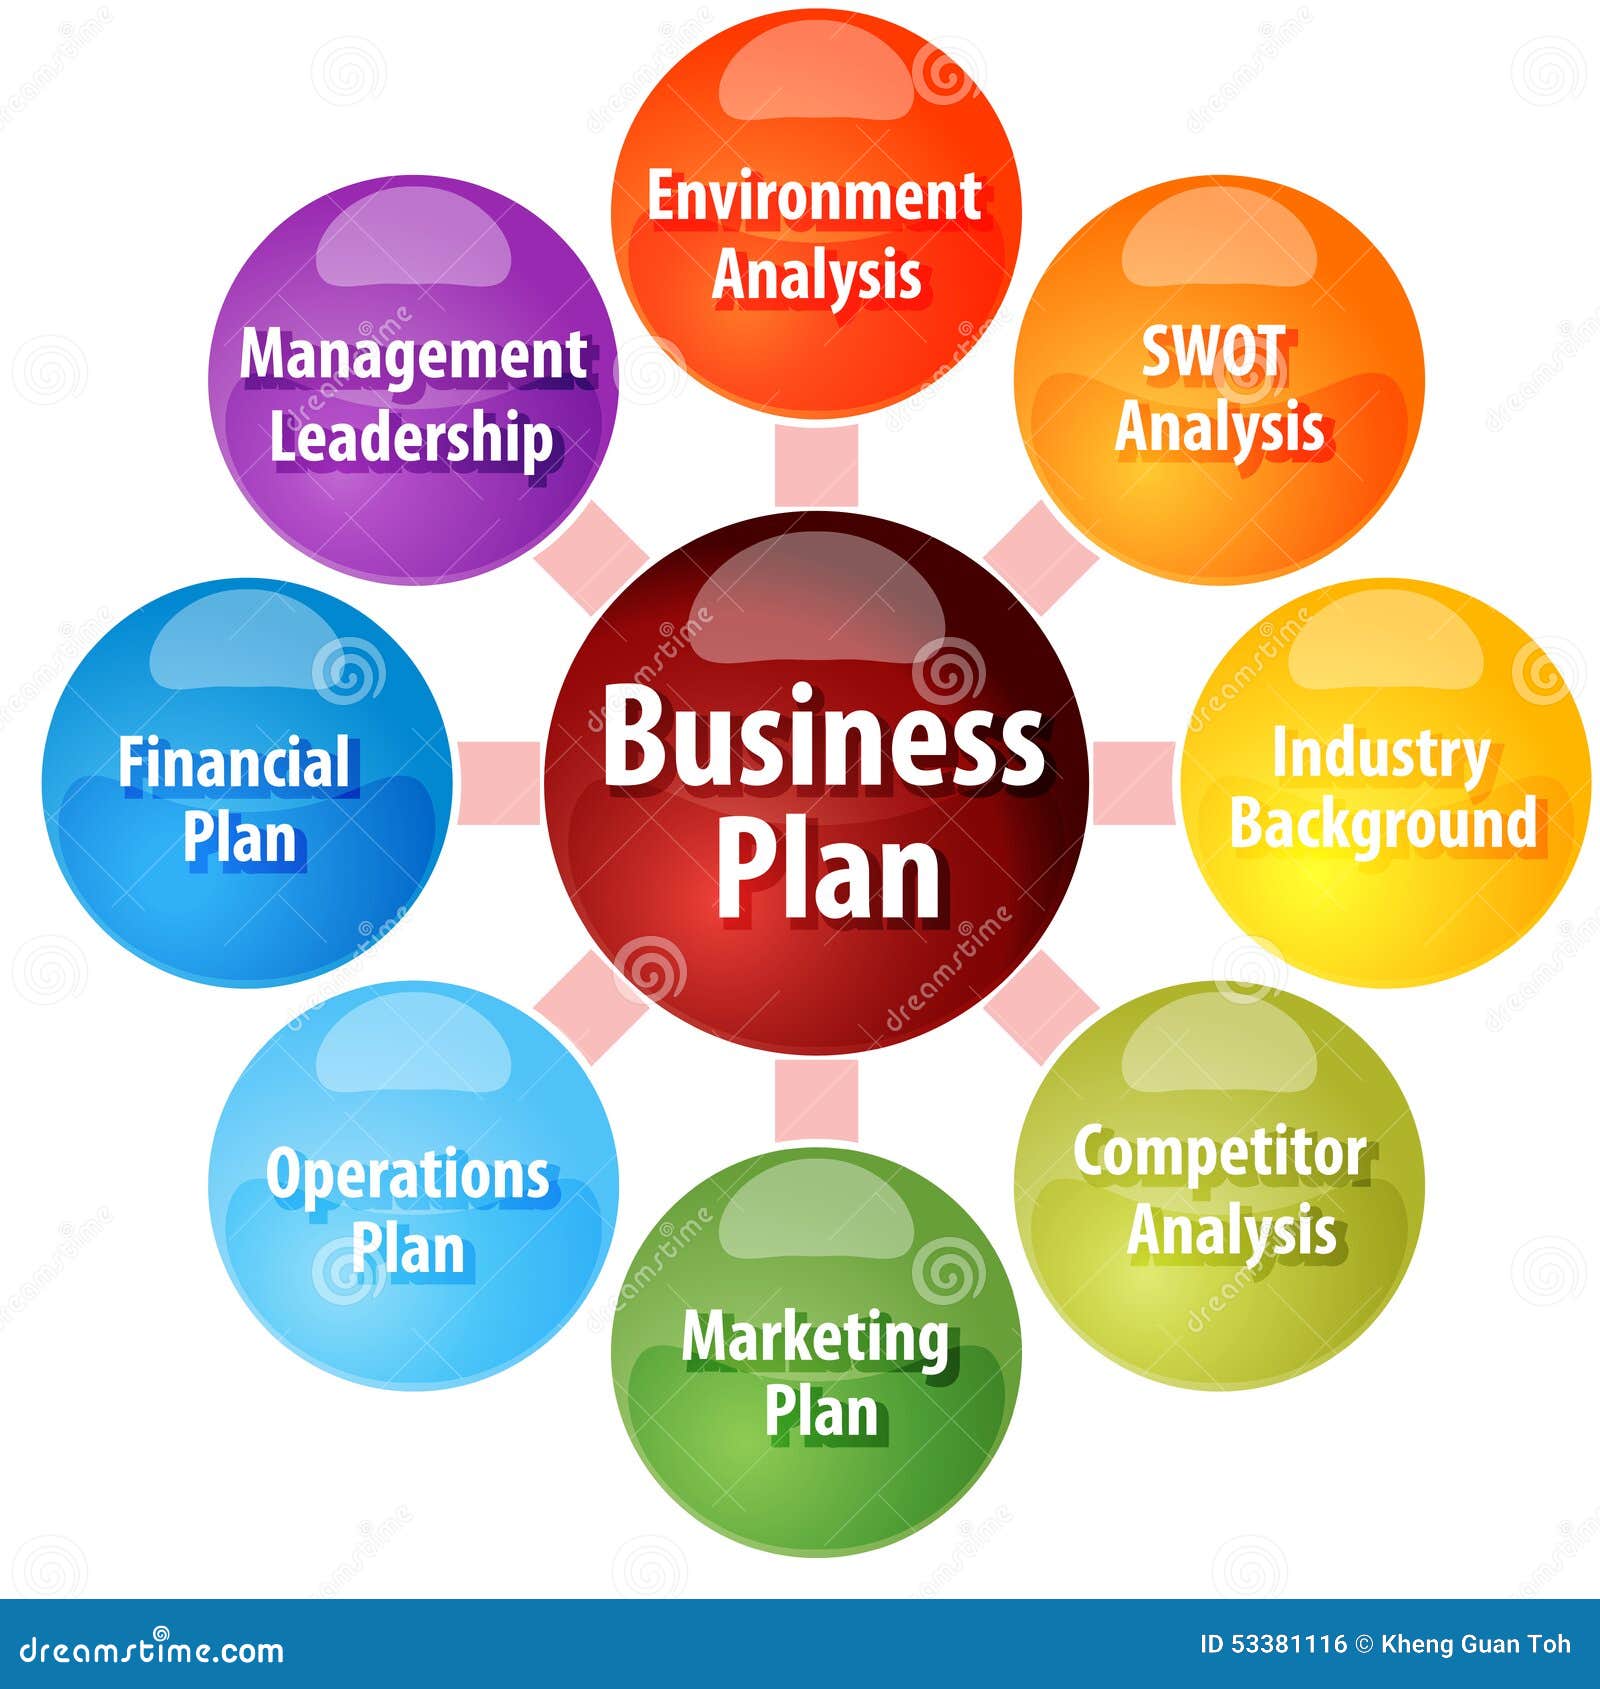 components of a business plan grade 9